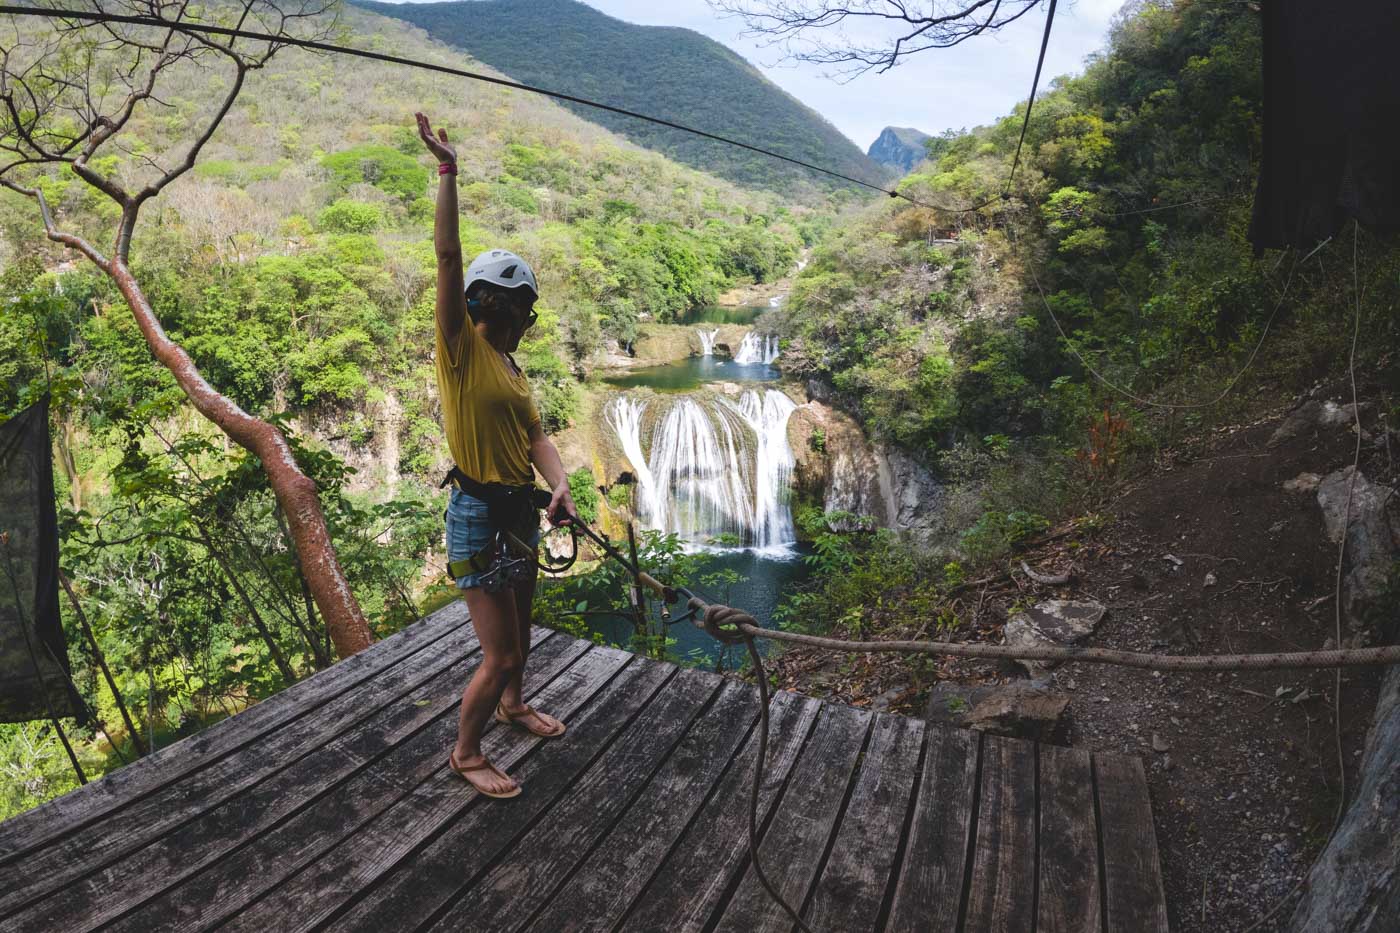 Nina with one arm raised in zipline gear and a helmet looking over Micos Waterfall from a wooden platform.